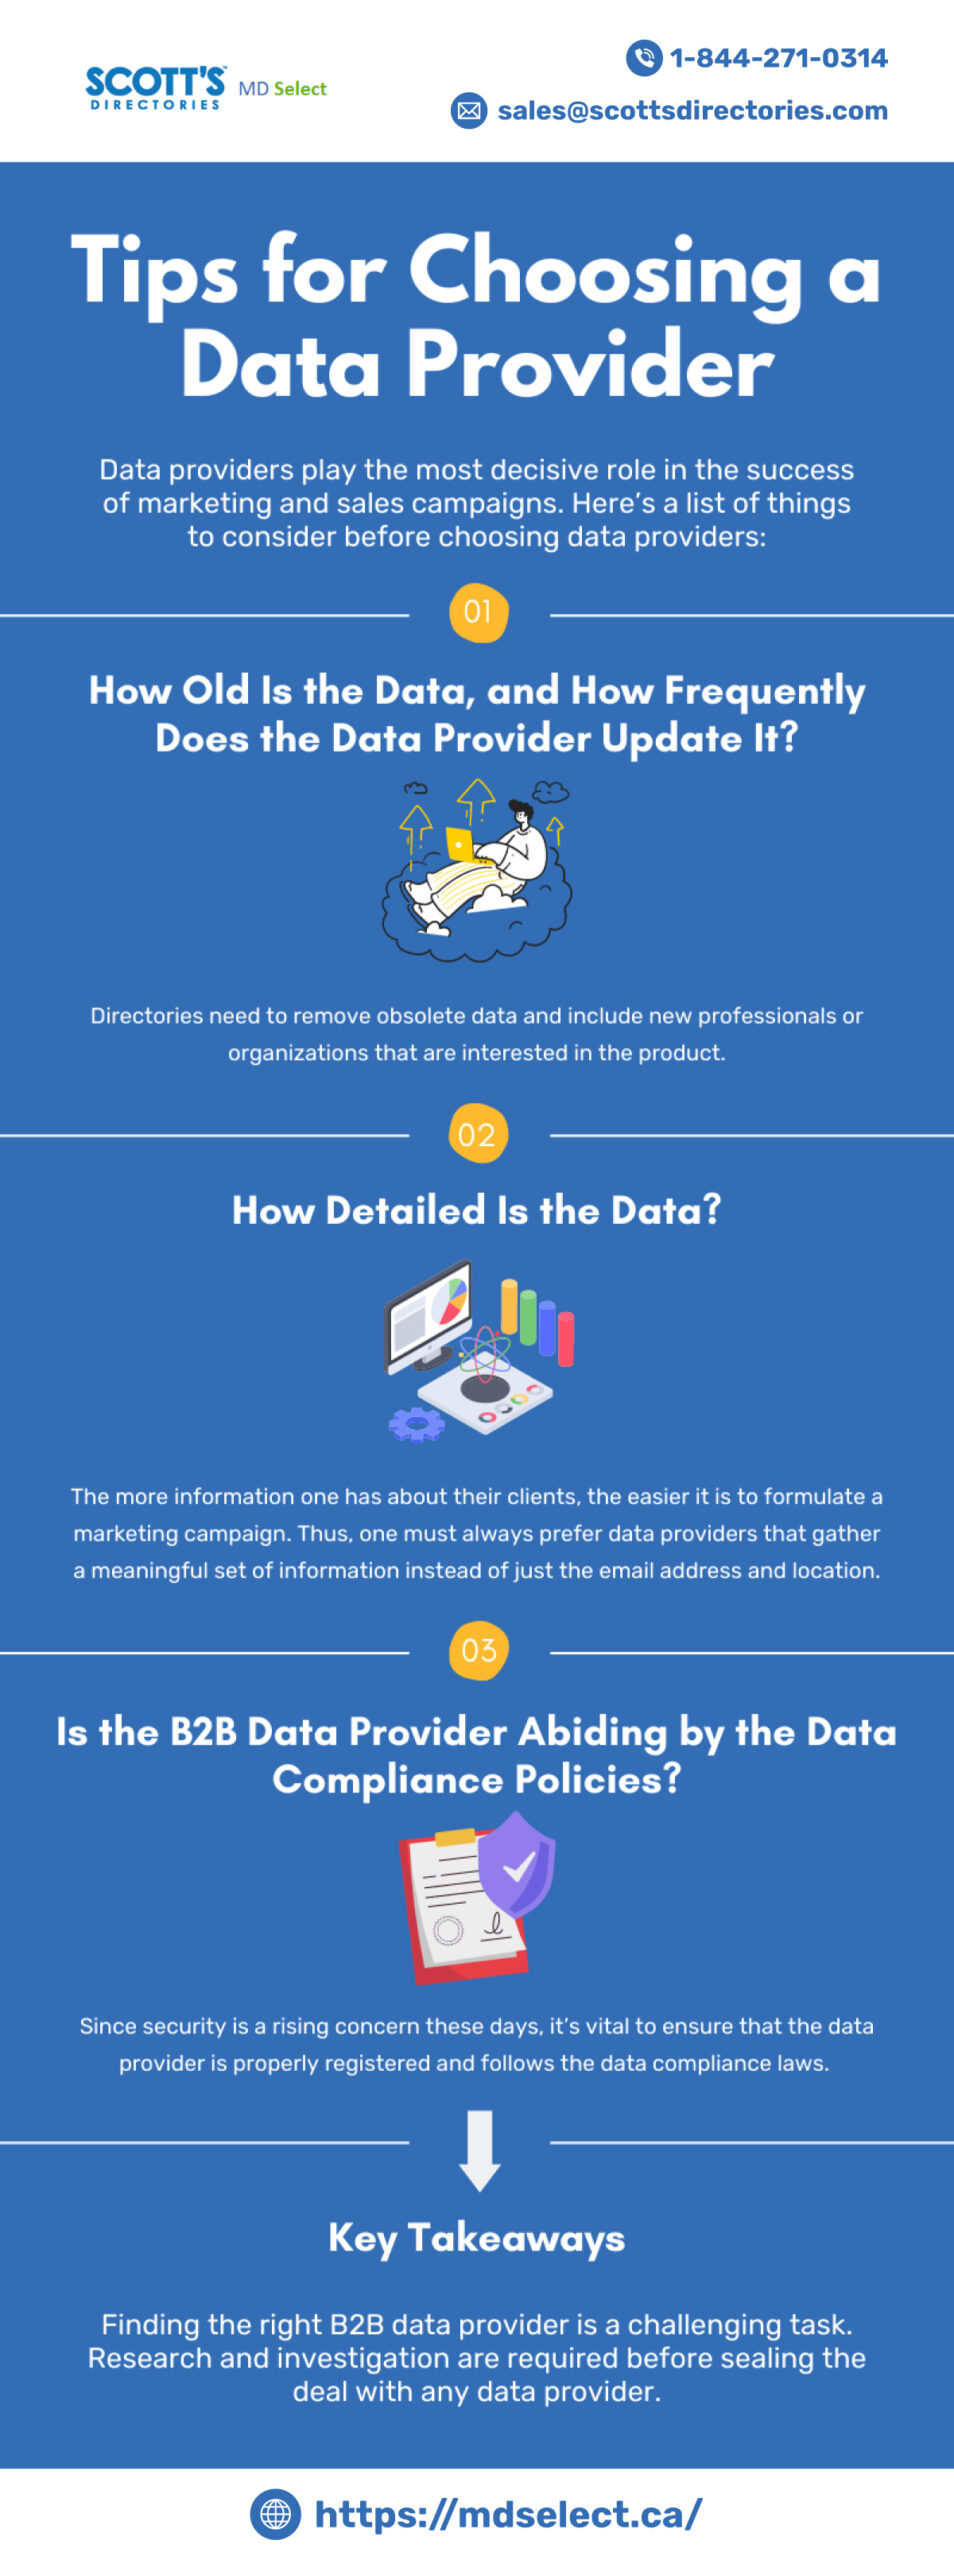 © 1-844-271-0314

SCOTT'S vo select

prereromes ® sales@scottsdirectories.com

 

TTR CT el TLR
Data Provider

Data providers play the most decisive role in the success
of marketing and sales campaigns. Here's a list of things
to consider before choosing data providers:

How Old Is the Data, and How Frequently
Does the Data Provider Update It?

S$,

4

Directories need to remove obsolete data and include new professionals or

organizations that are interested in the product

How Detailed Is the Data?

The more information one has about their clients, the easier it is to formulate a
marketing campaign. Thus, one must always prefer data providers that gather
a meaningful set of information instead of just the email address and location.

Is the B2B Data Provider Abiding by the Data
Compliance Policies?

4

Since security is a rising concern these days, it's vital to ensure that the data
provider is properly registered and follows the data compliance laws.

i

[CIAL ELIS

Finding the right B2B data provider is a challenging task.
Research and investigation are required before sealing the
deal with any data provider.

https:/mdselect.ca/